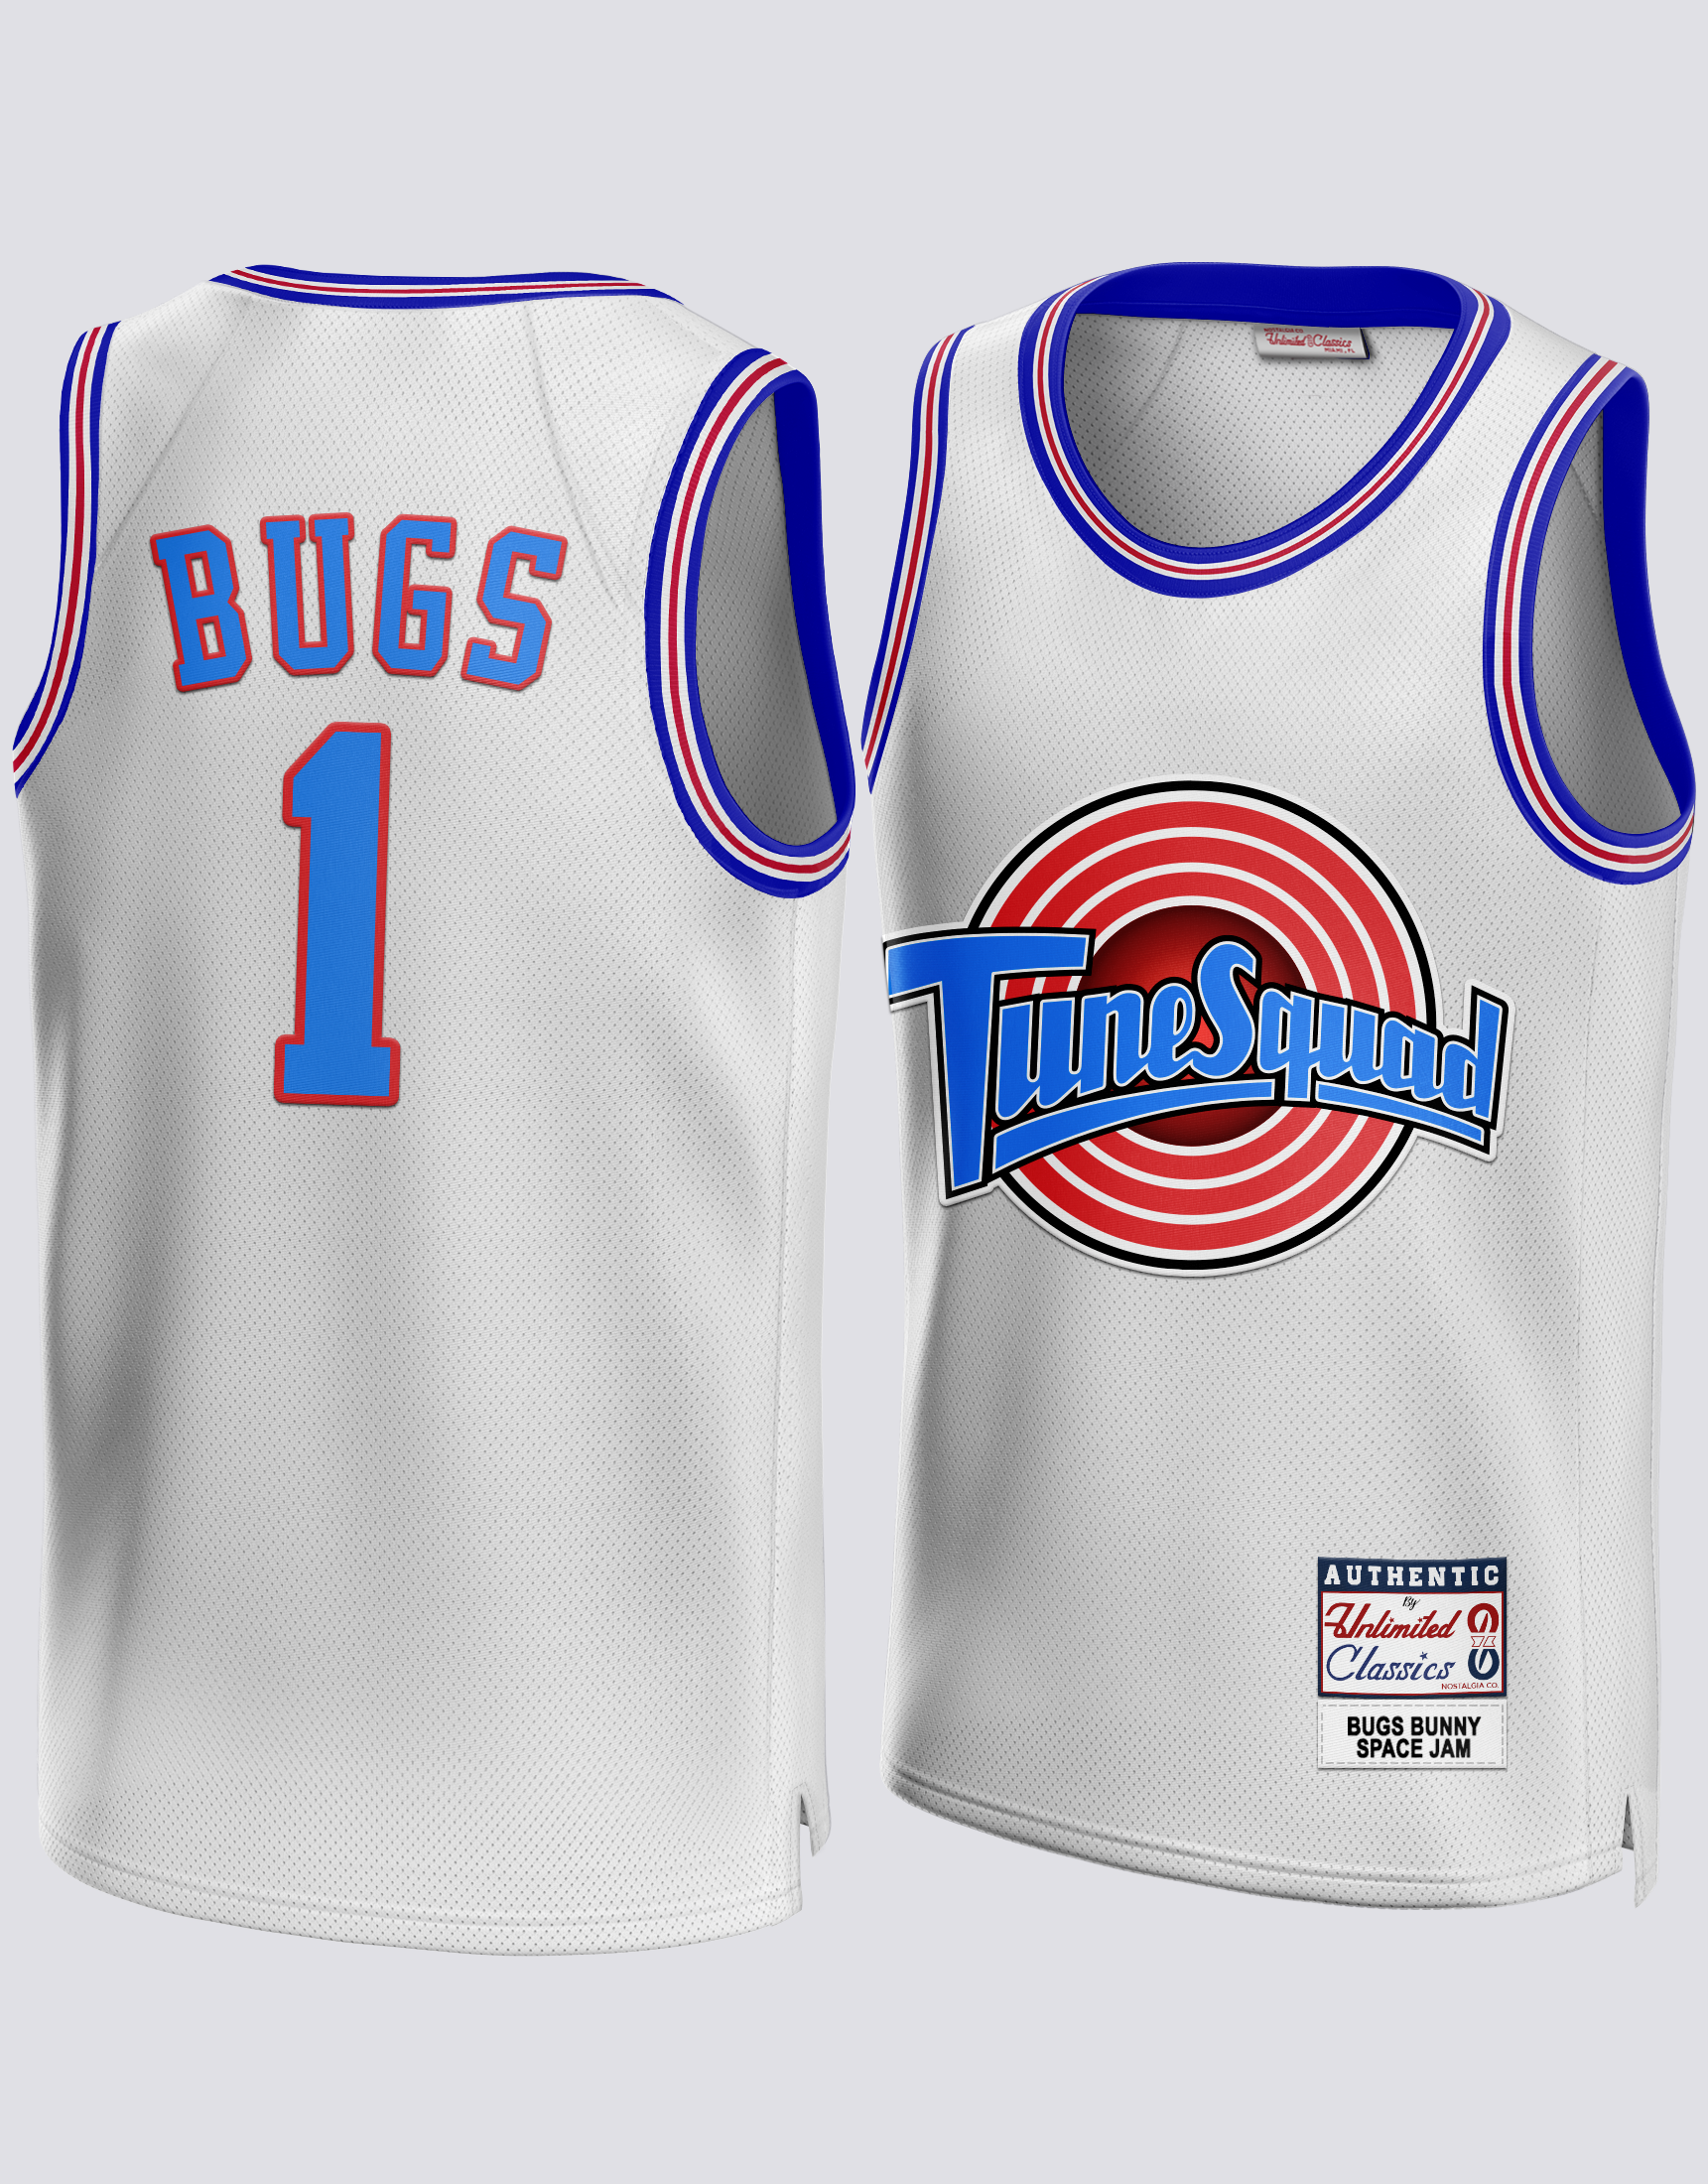 Bugs Bunny #1 Space Jam Tune Squad White Jersey